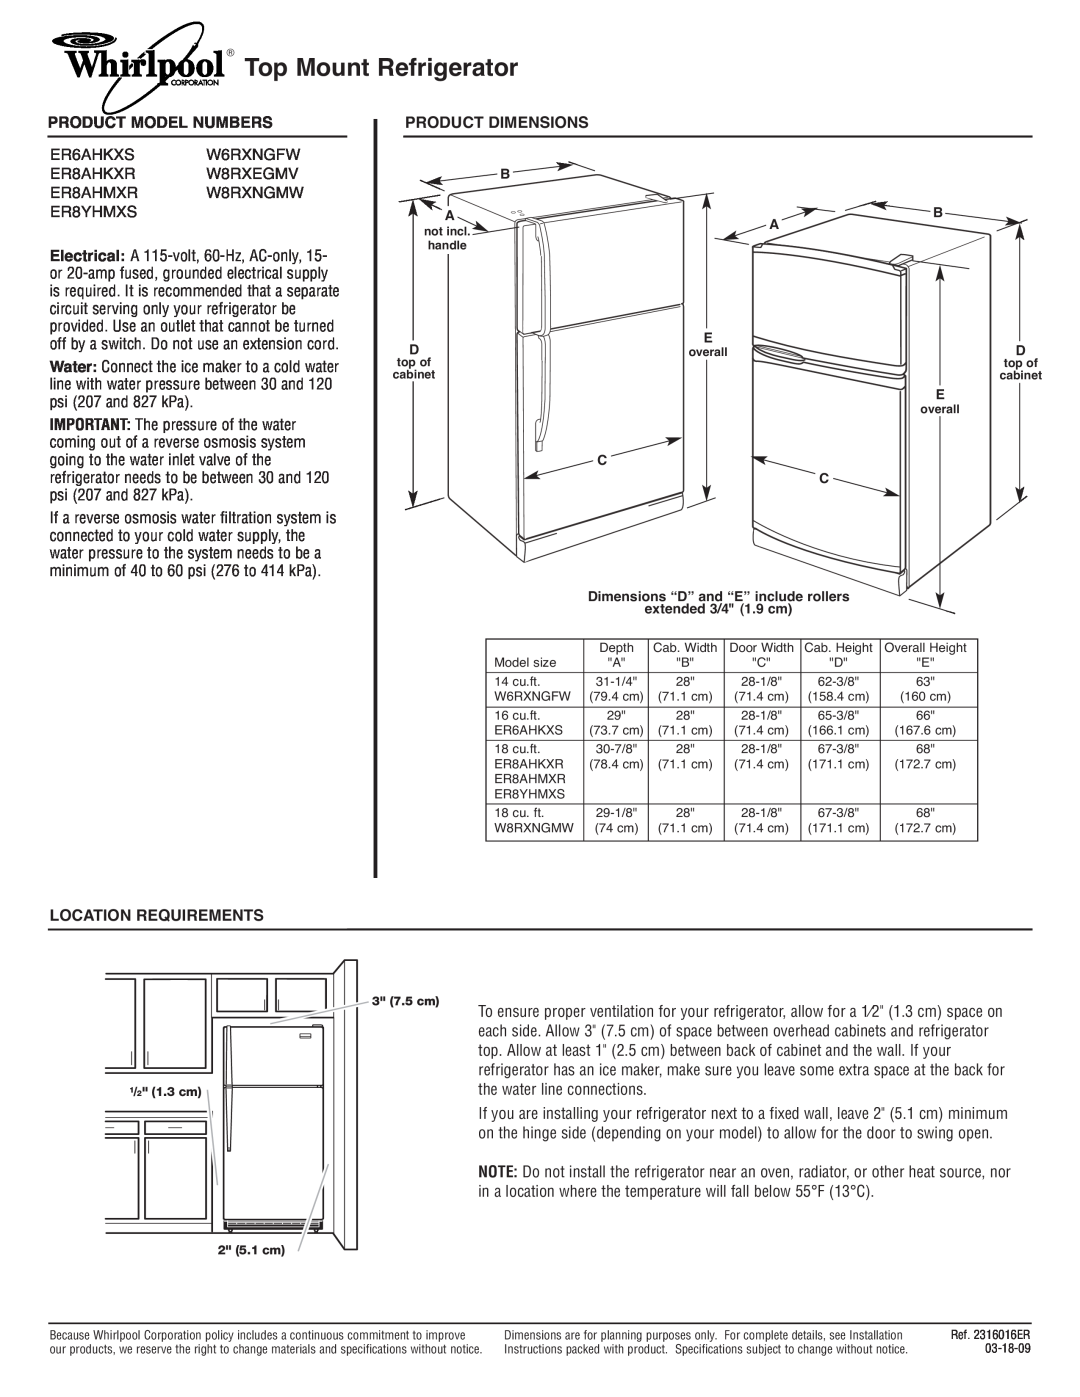 Whirlpool W8RXEGMV dimensions Top Mount Refrigerator, Product Model Numbers, Product Dimensions, Location Requirements 